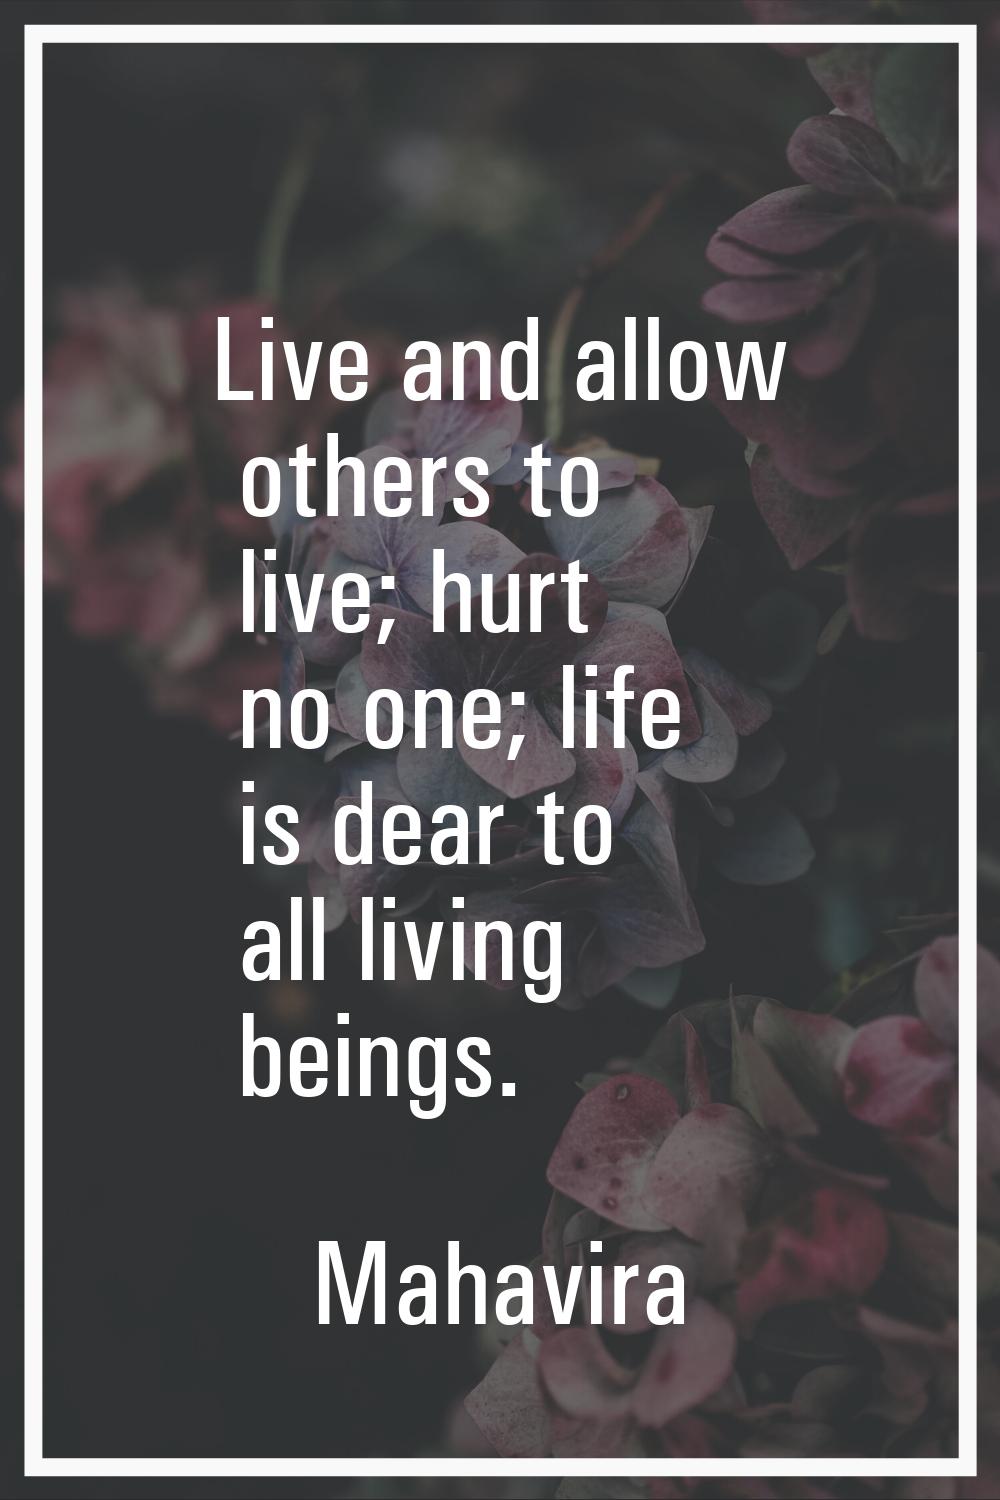 Live and allow others to live; hurt no one; life is dear to all living beings.